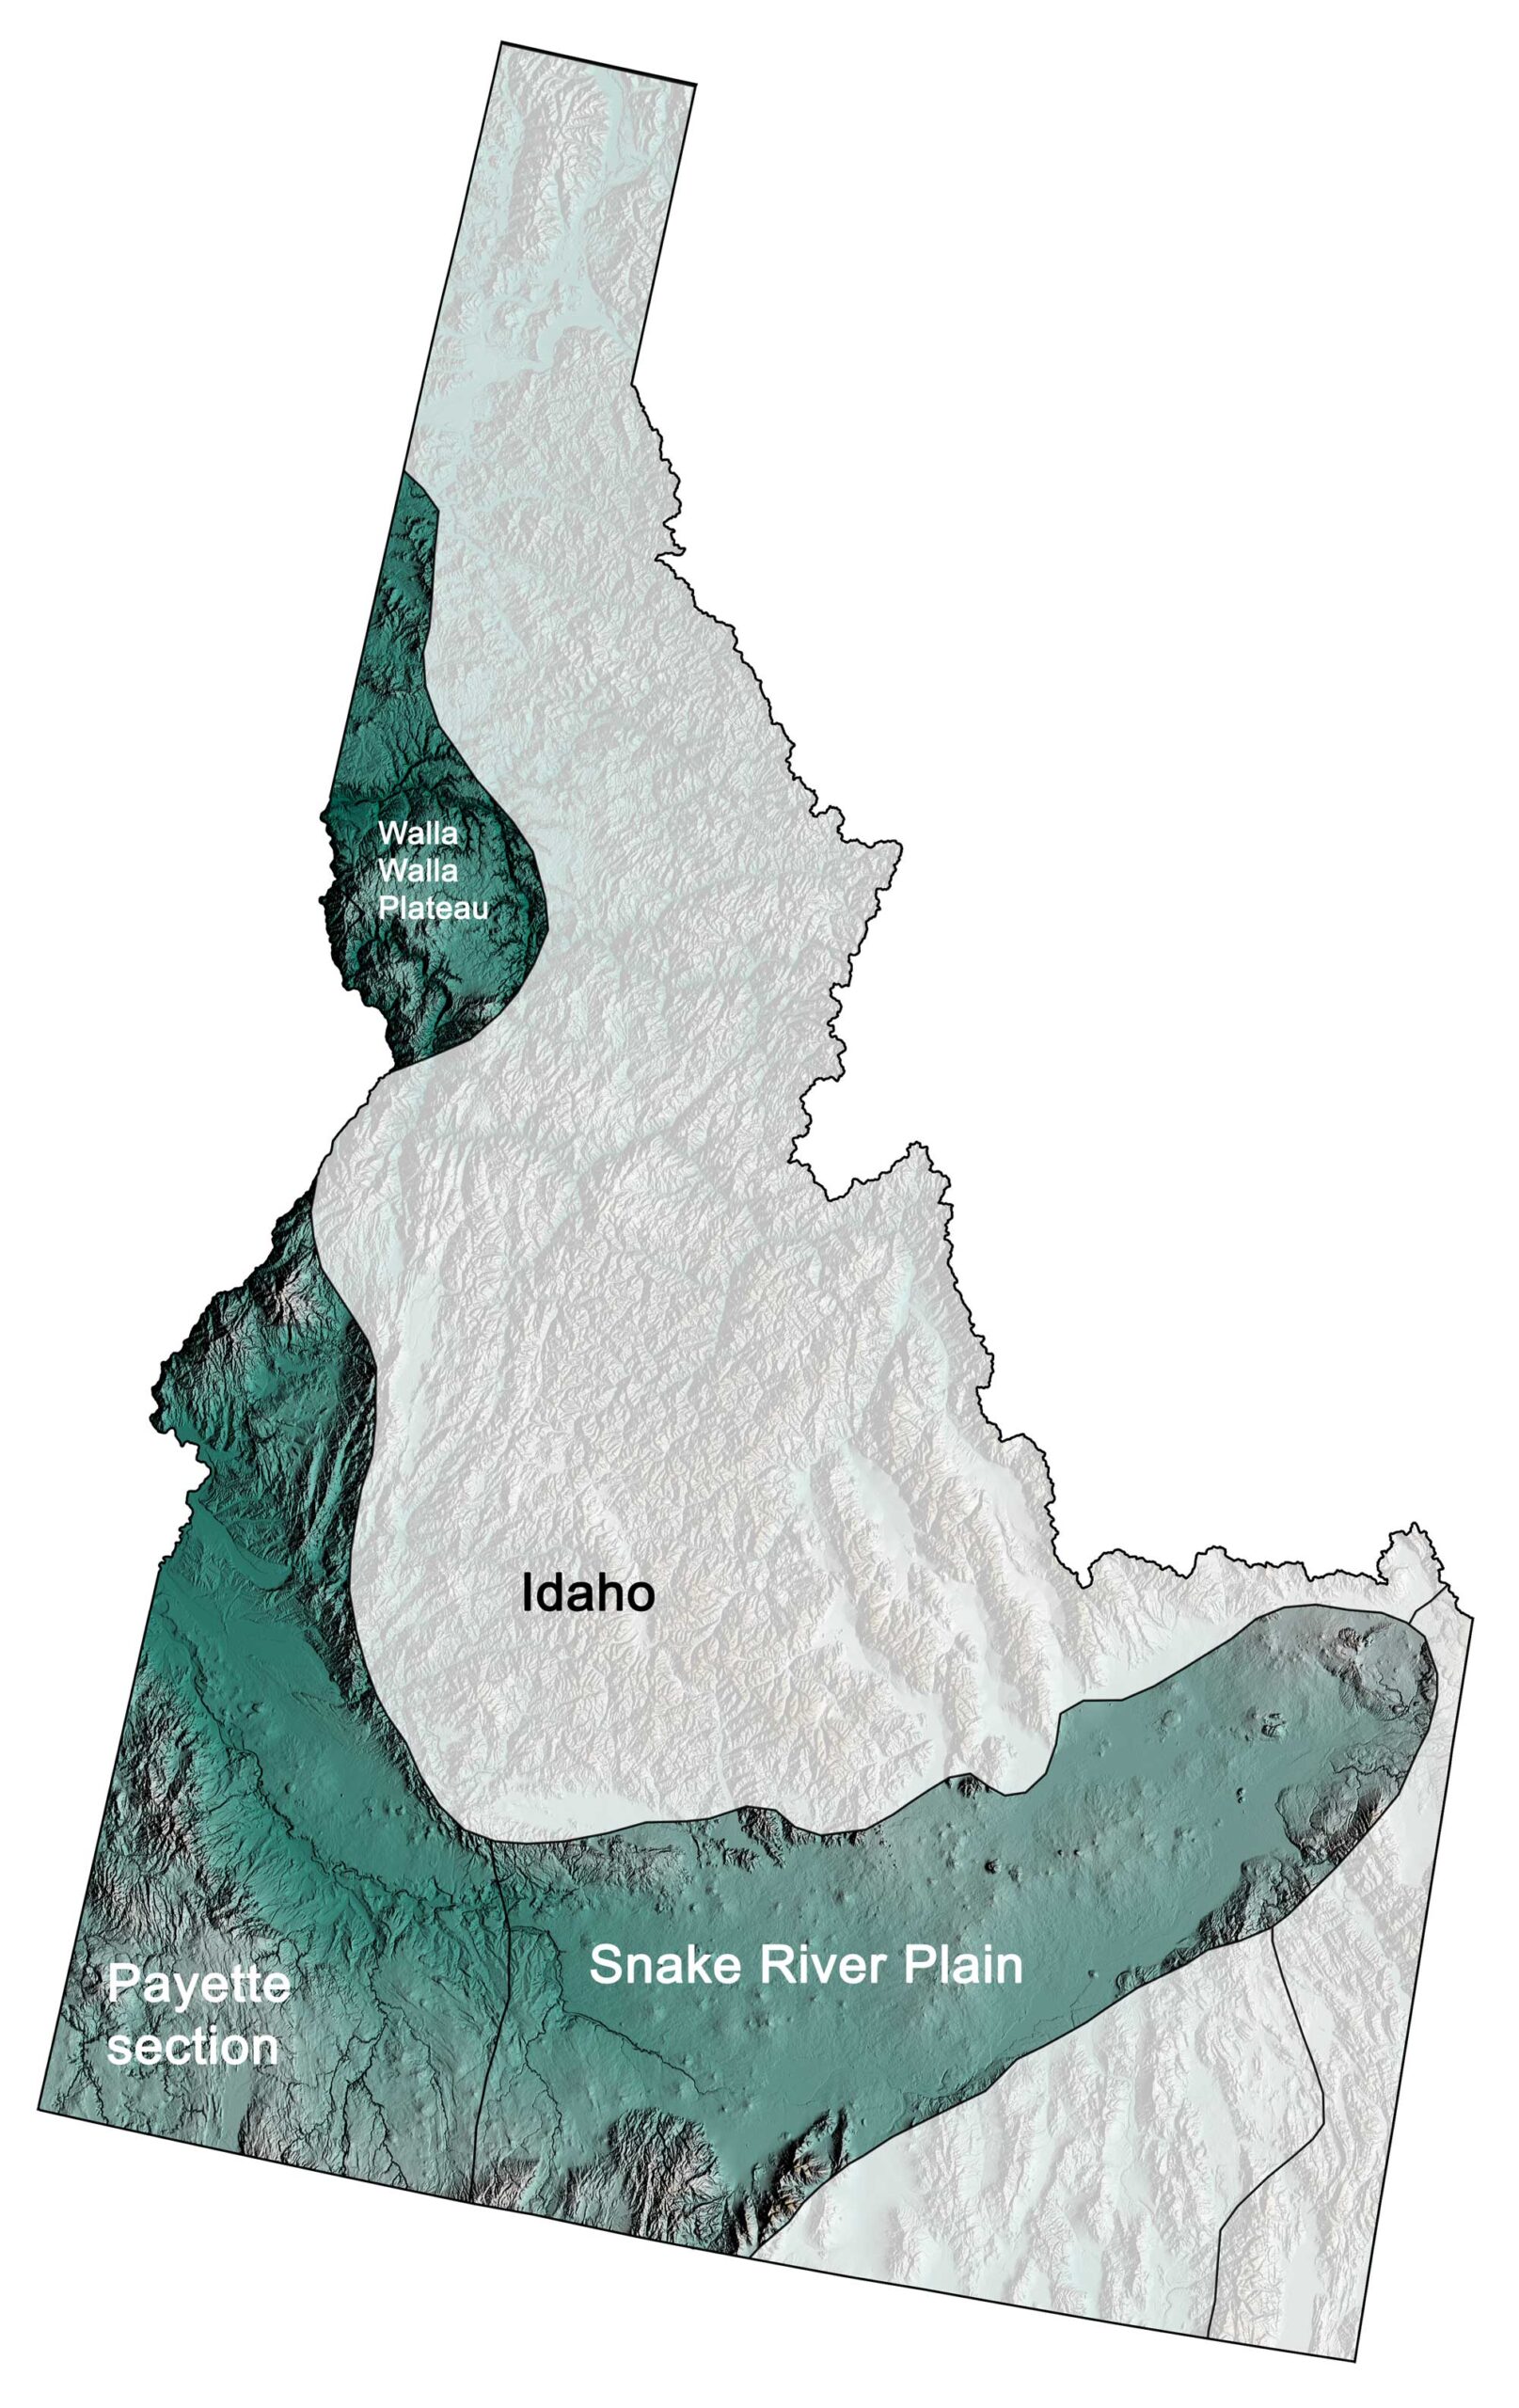 Topographic map of the Columbia Plateau region of the northwest-central United States.